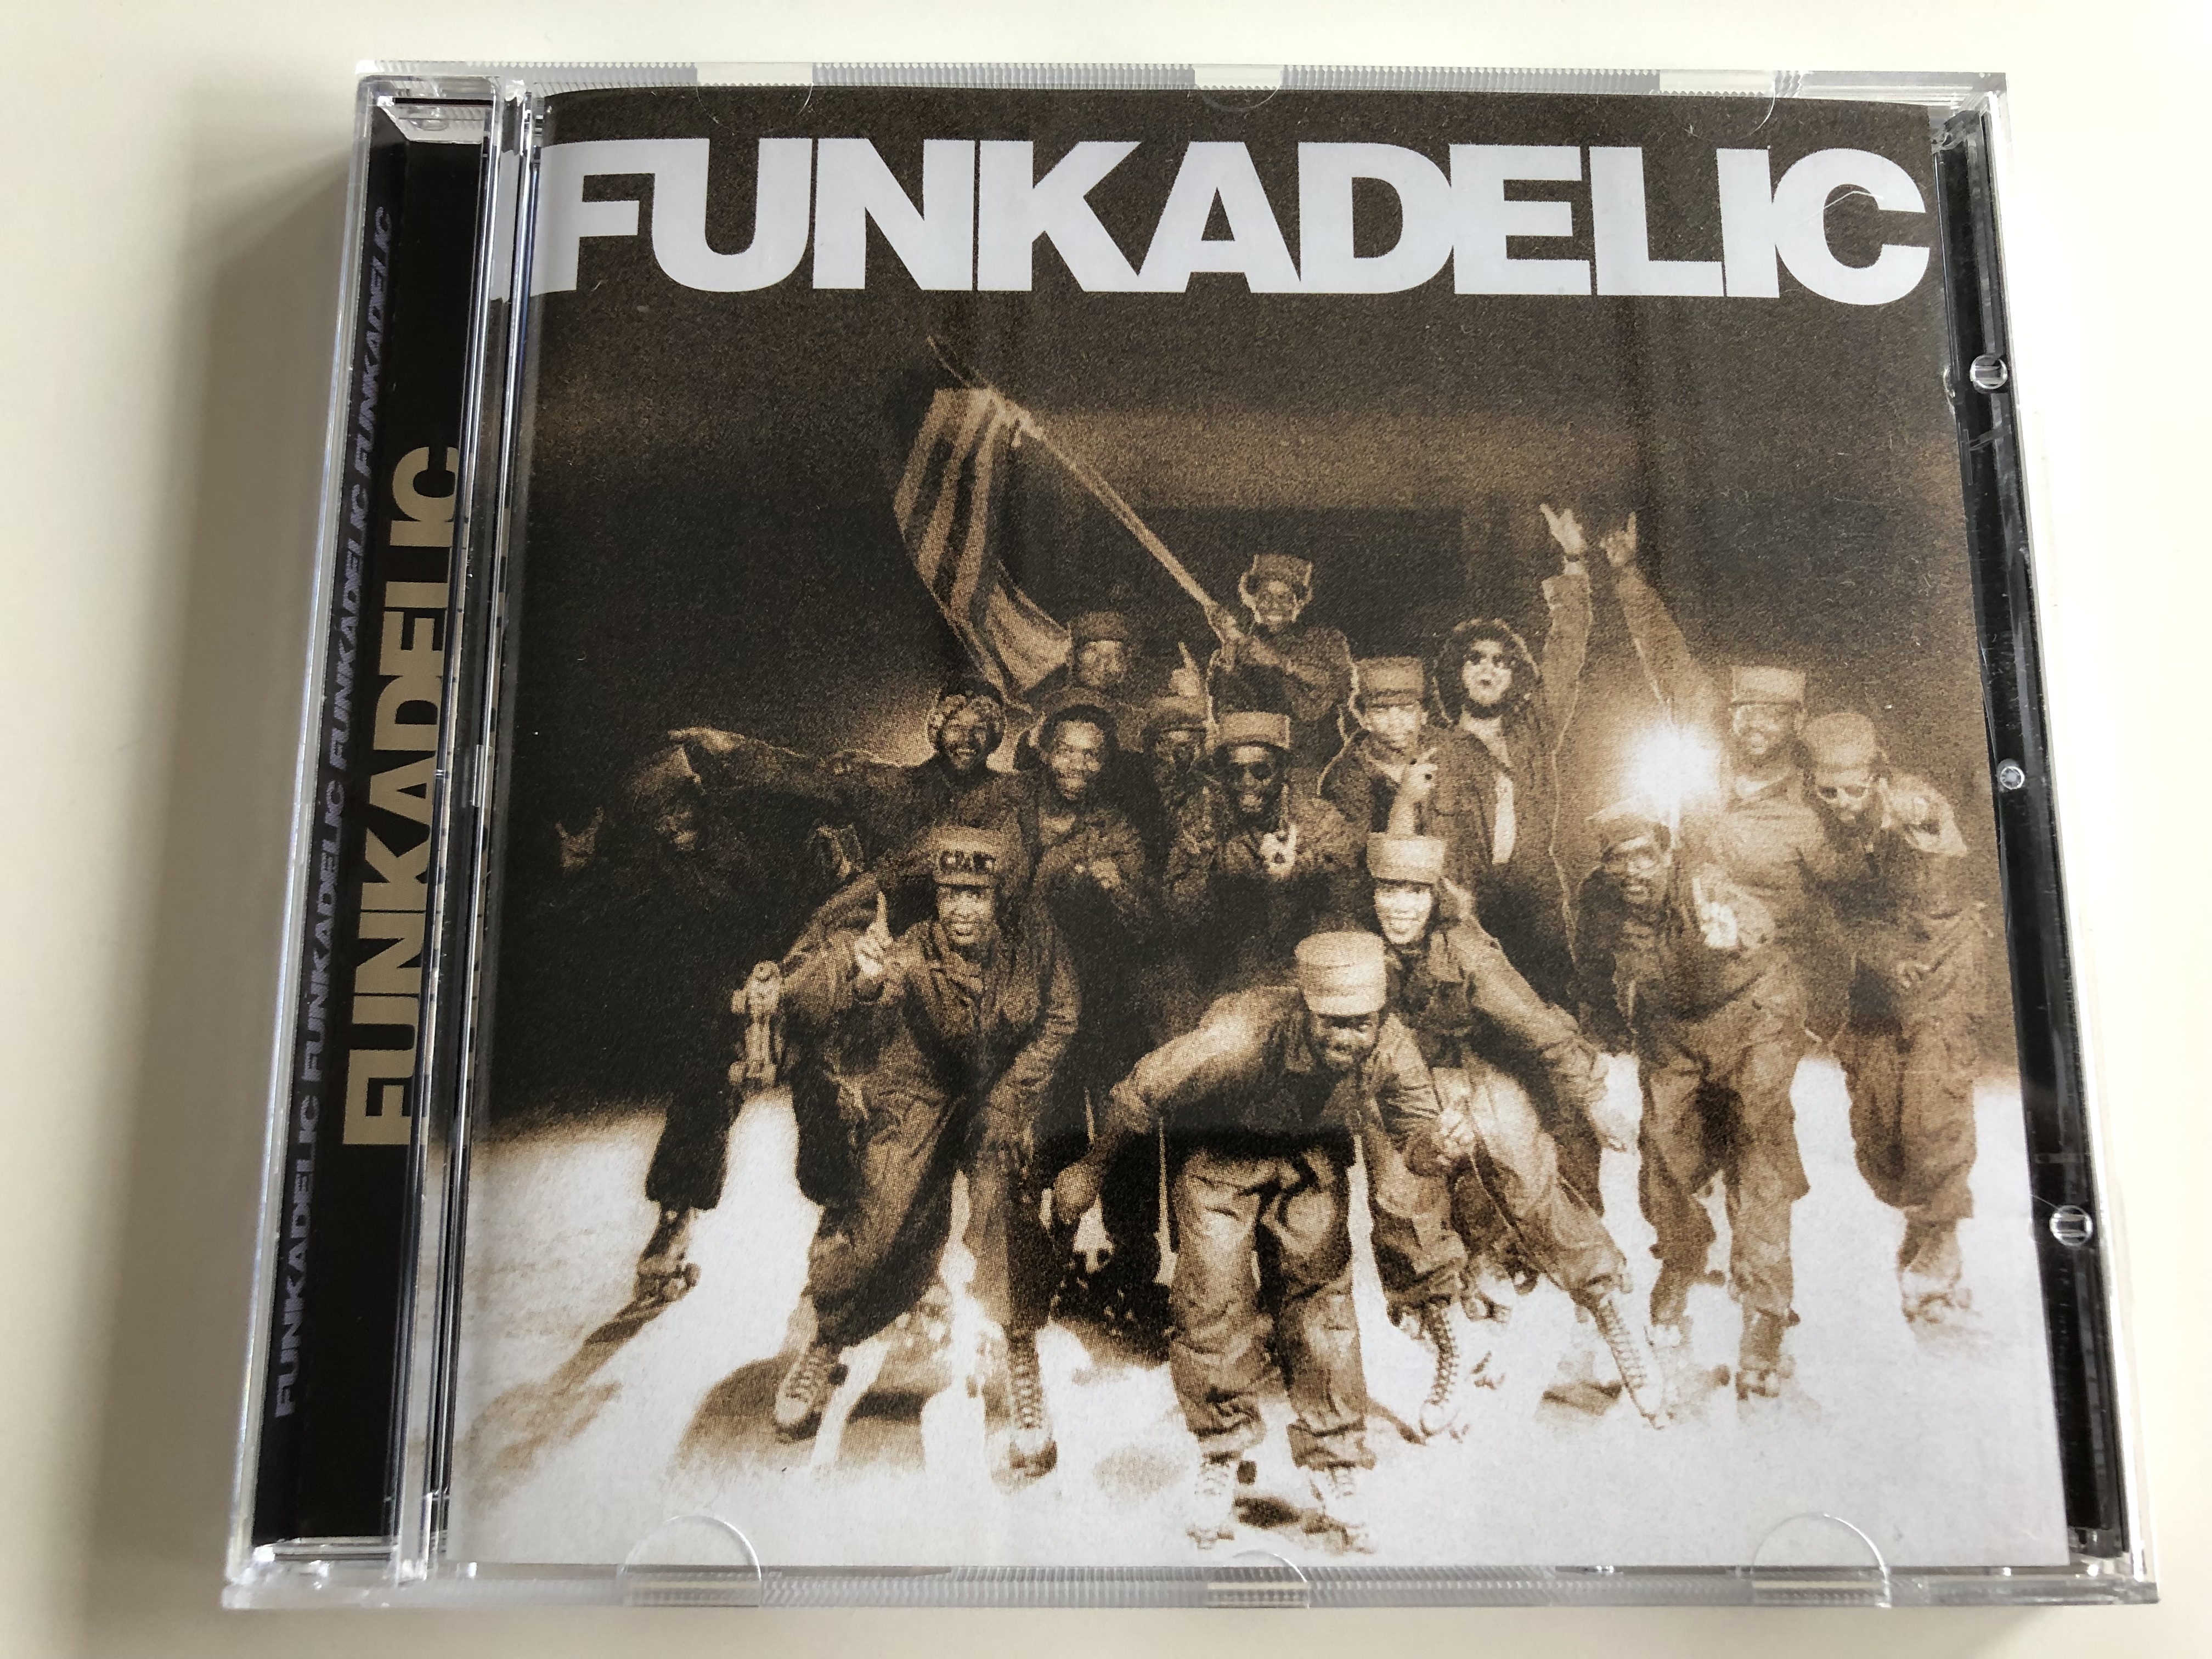 funkadelic-one-nation-under-a-groove-promo-12-adolescent-funk-audio-cd-2007-si-904714-disky-1-.jpg